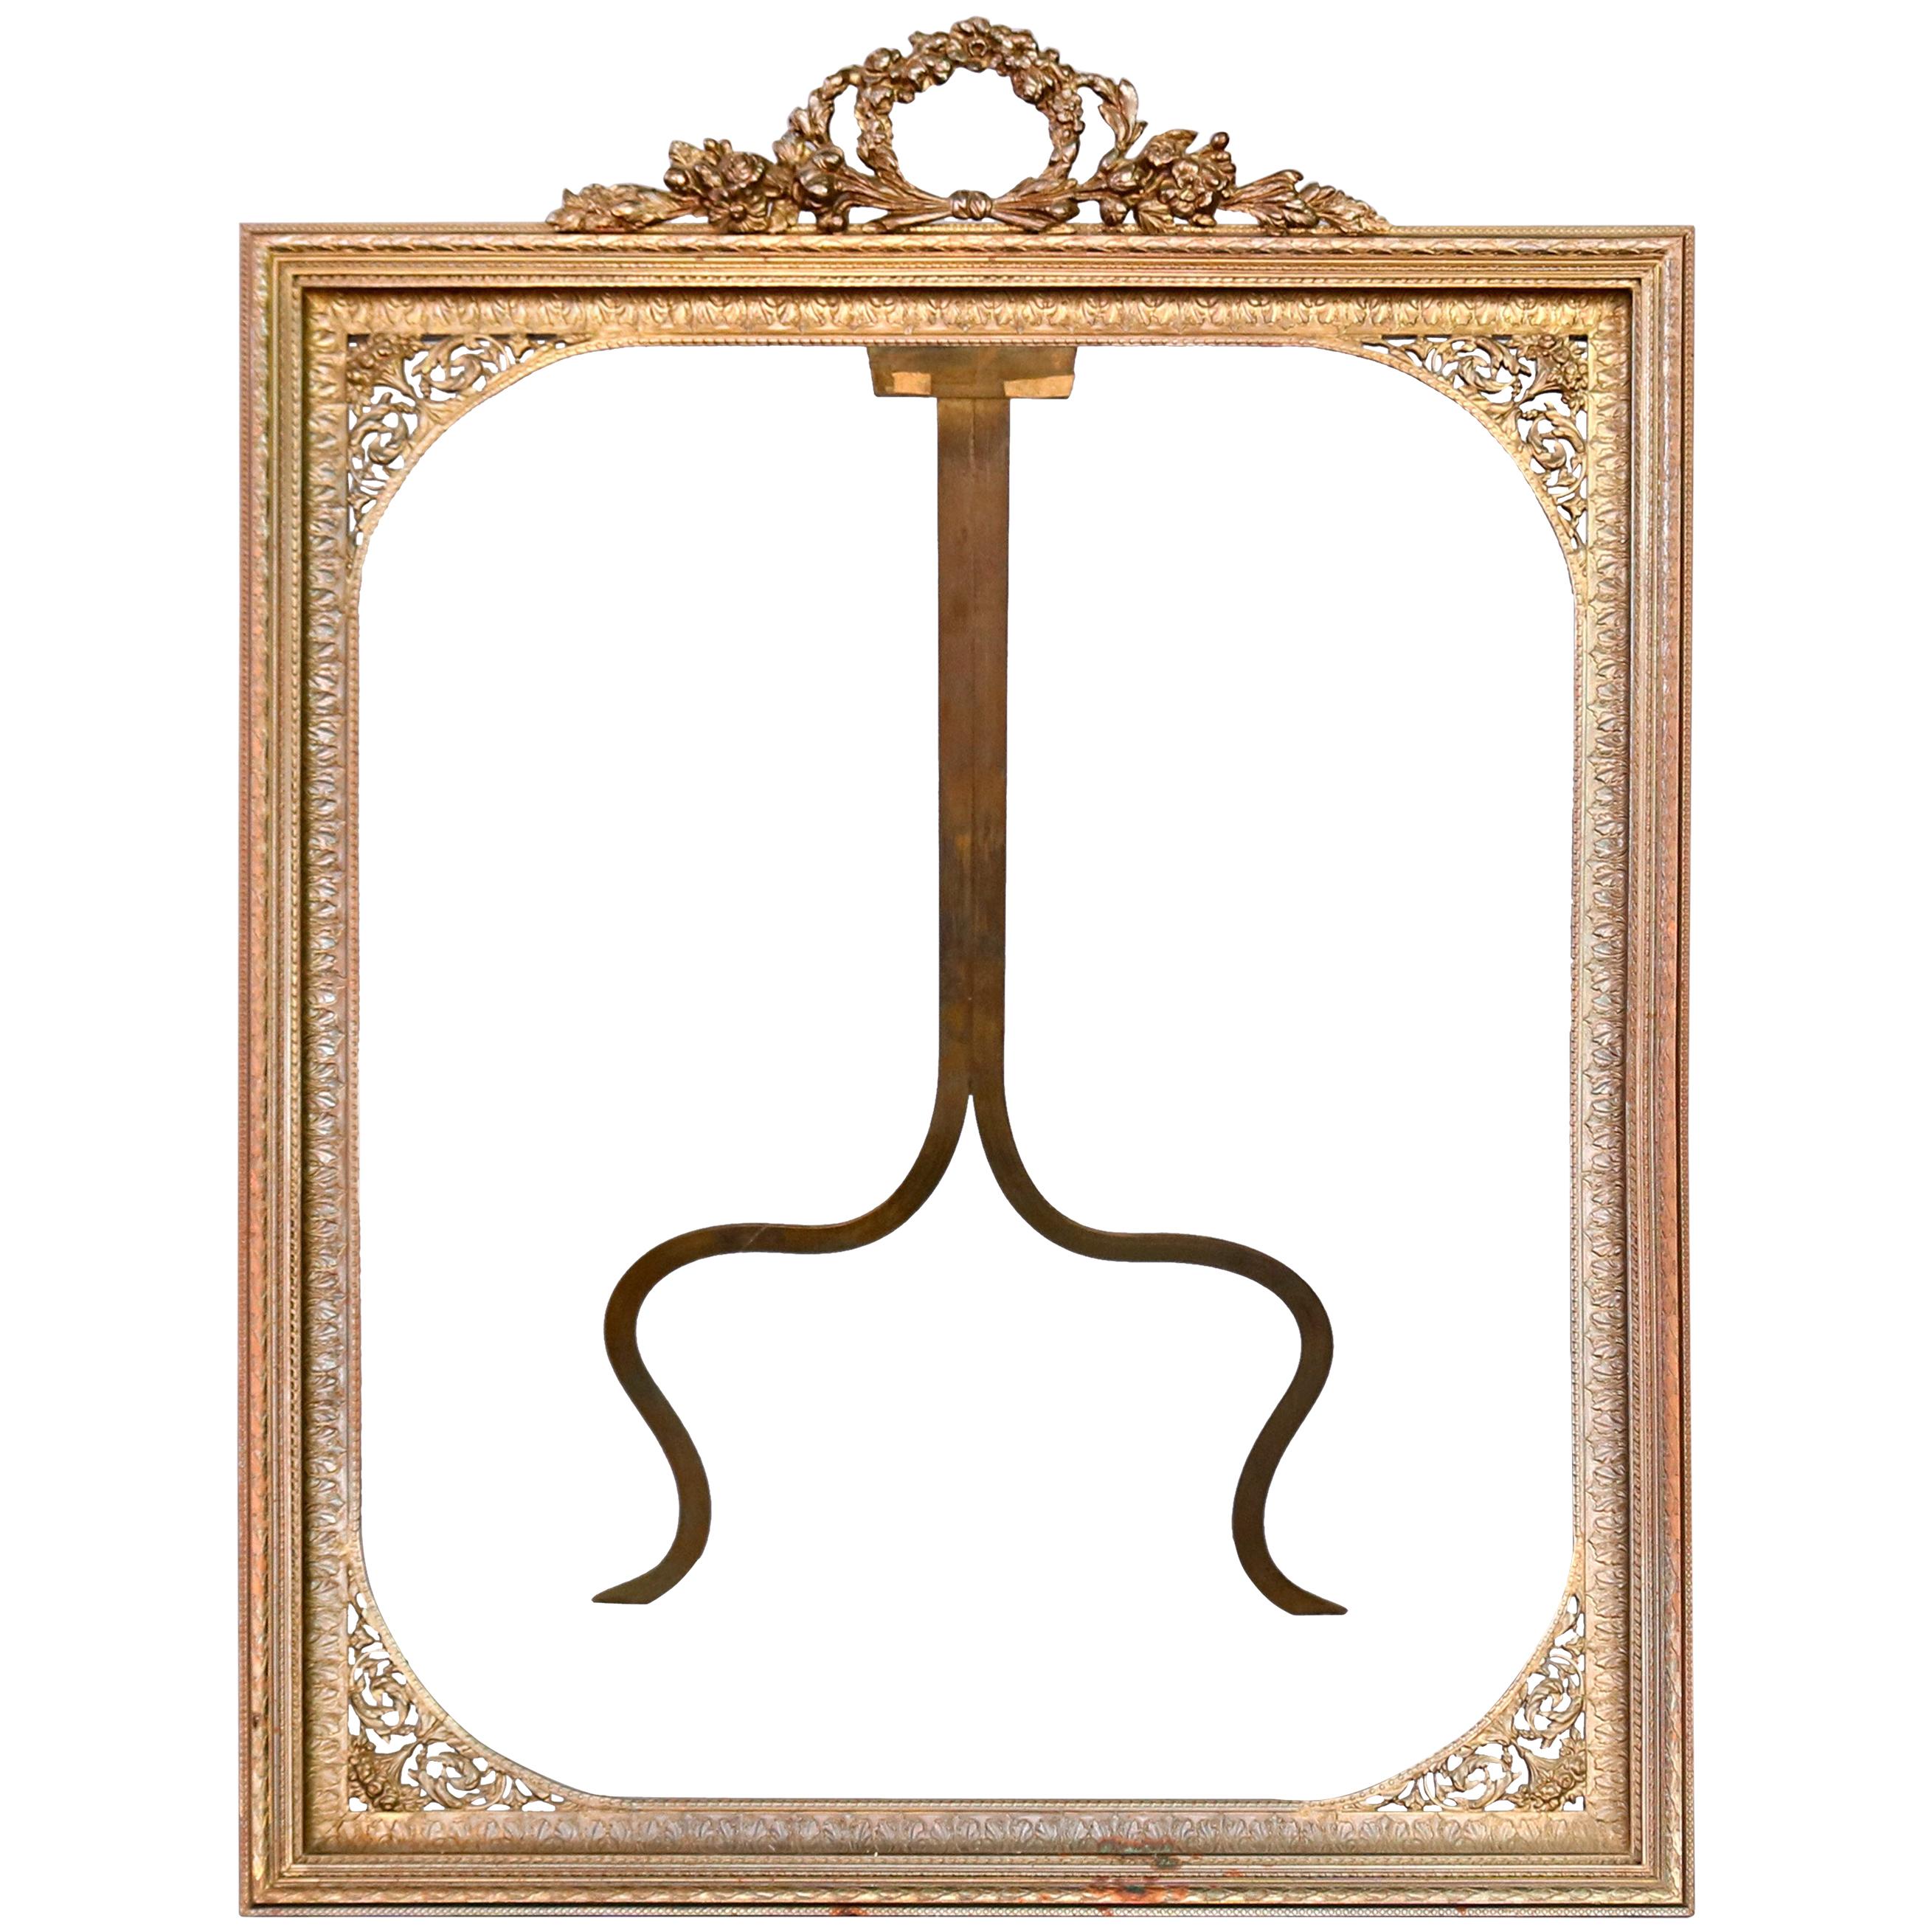 Oversized Antique French Bronze Neoclassical Picture Frame, circa 1910